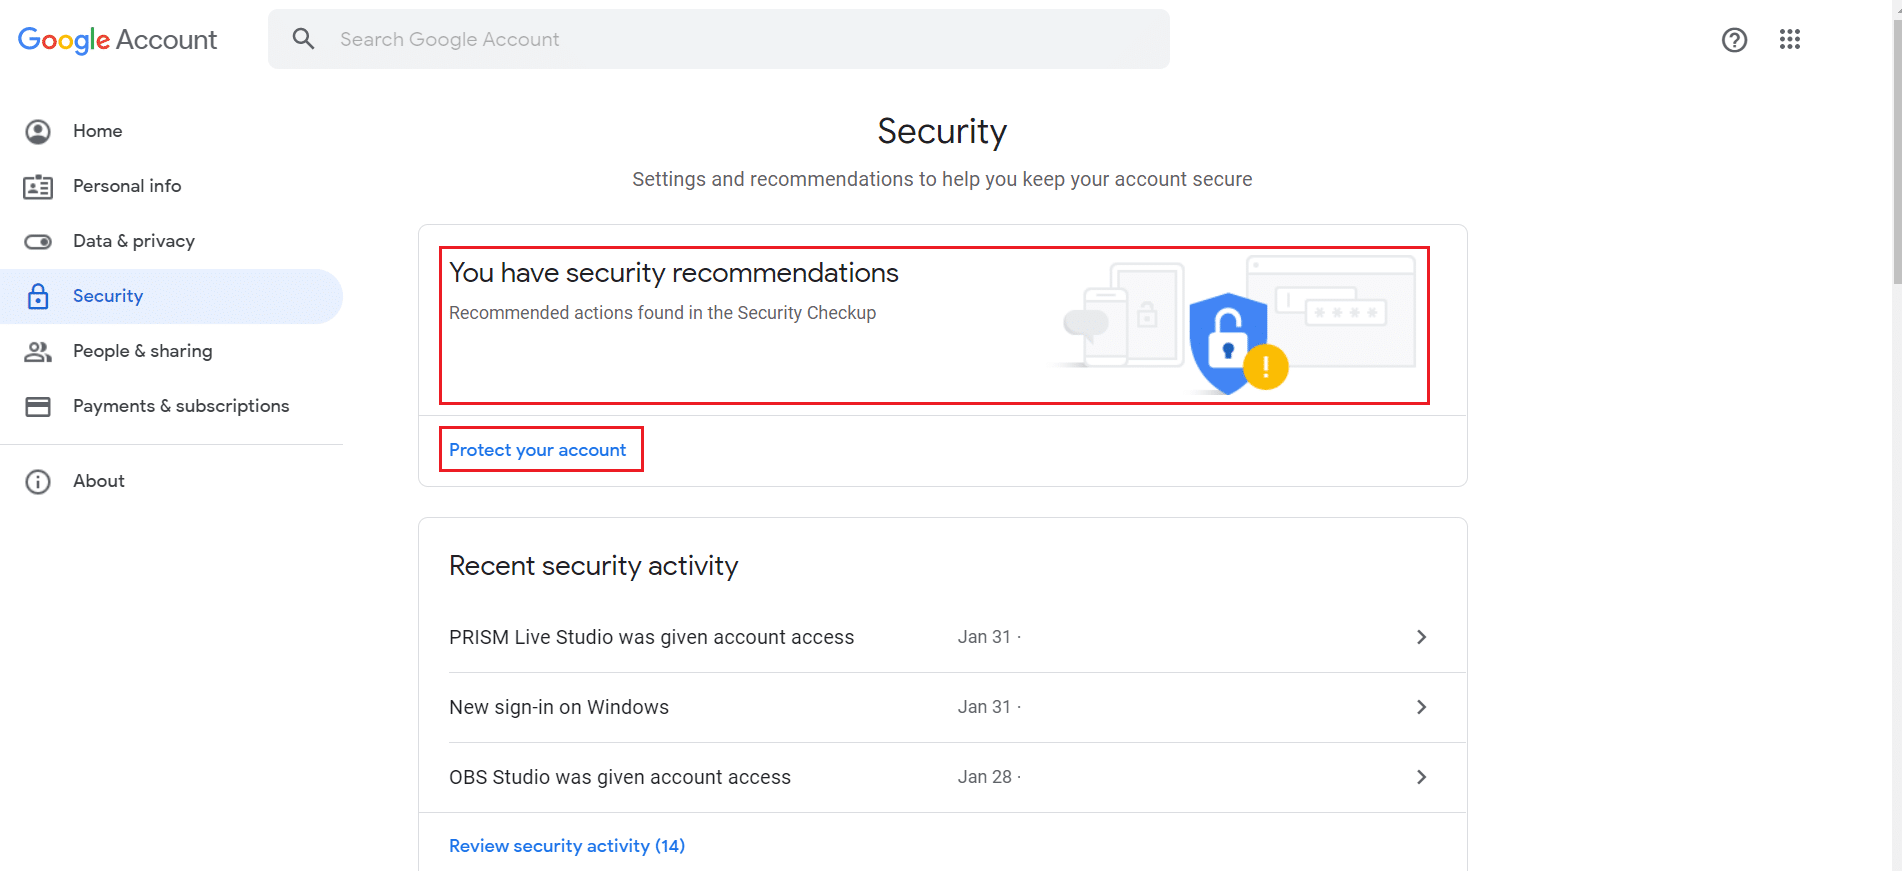 click on protect your account if there is any security recommendations in the google accounts security menu